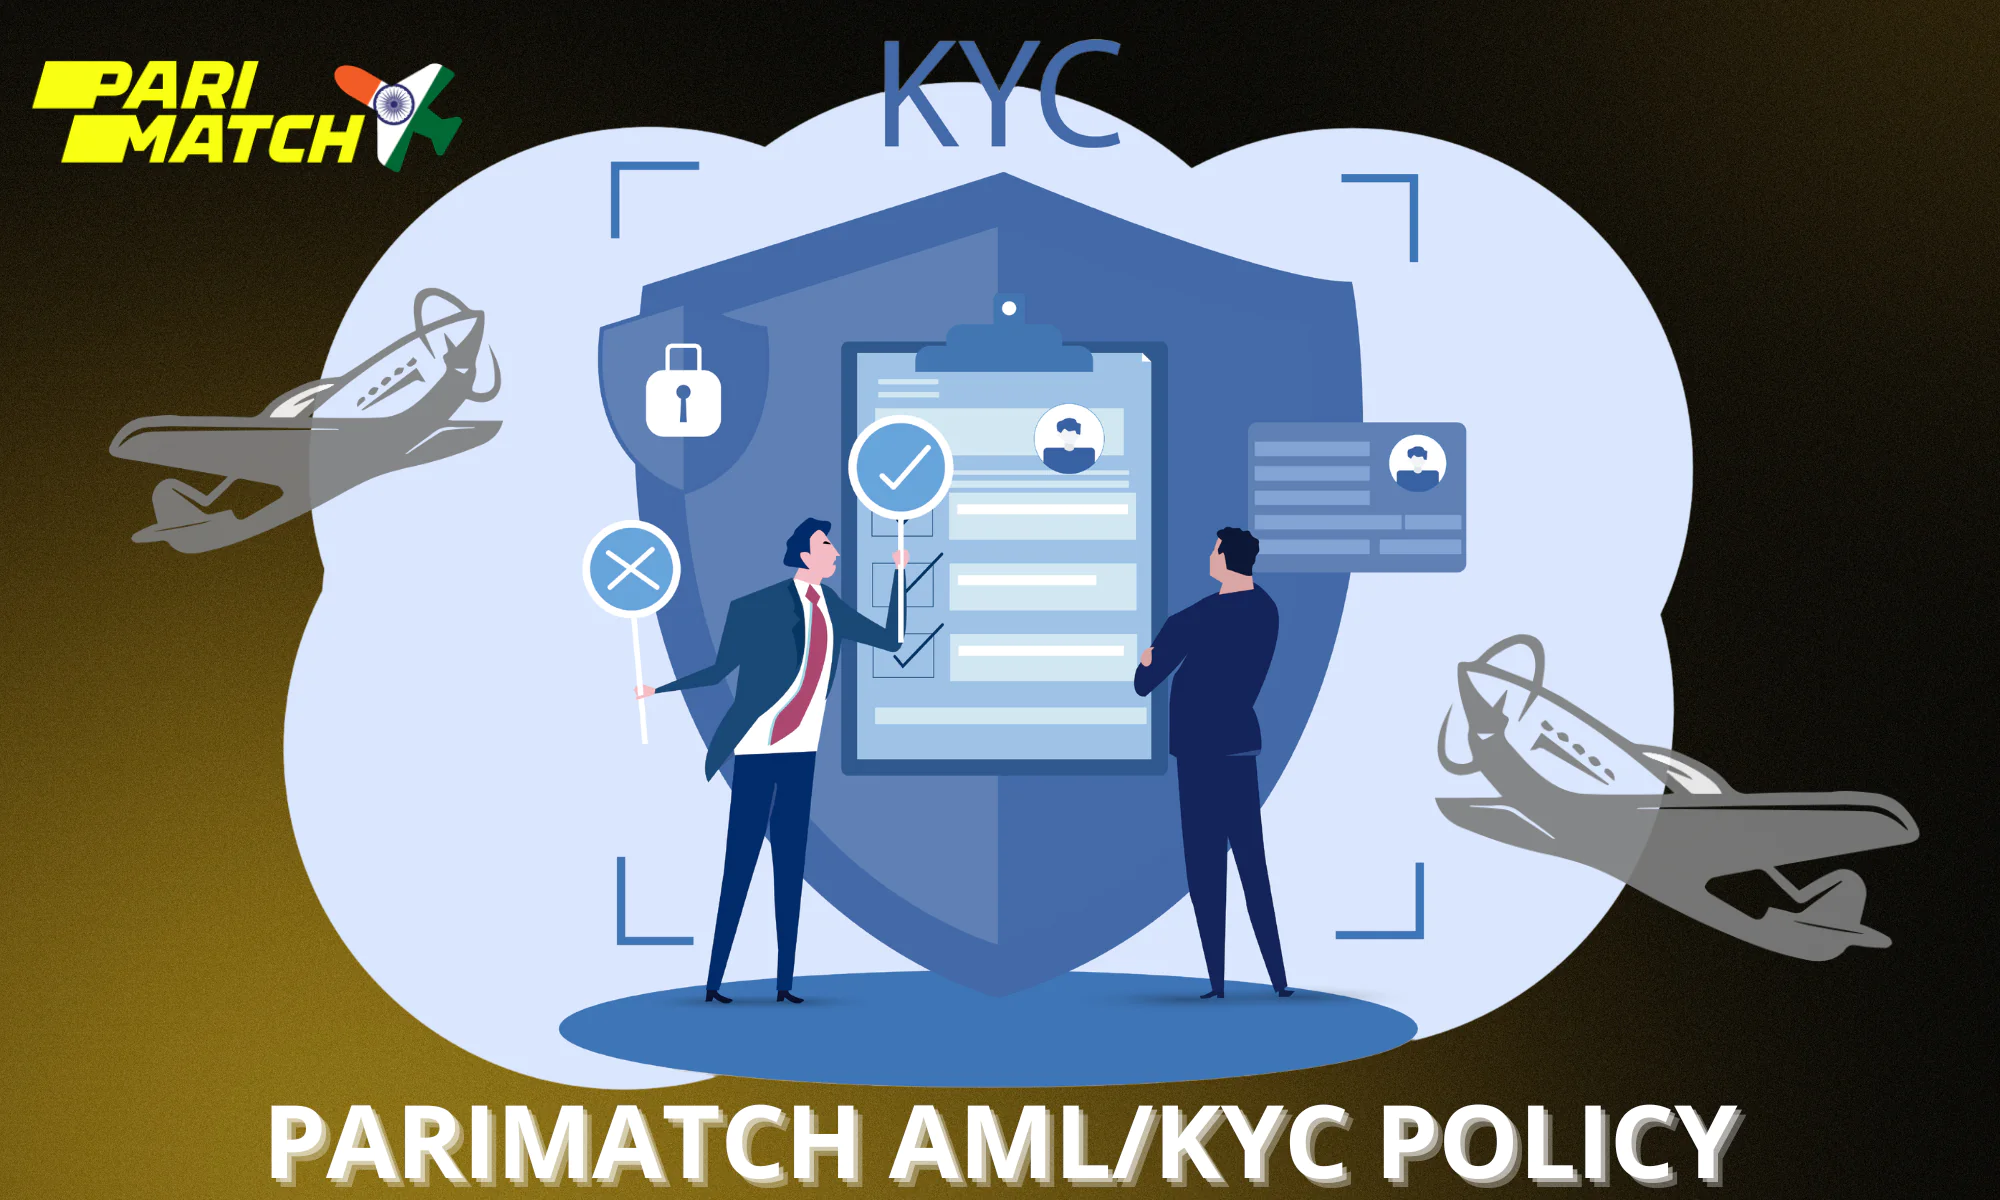 Parimatch adheres to the anti-money laundering policy